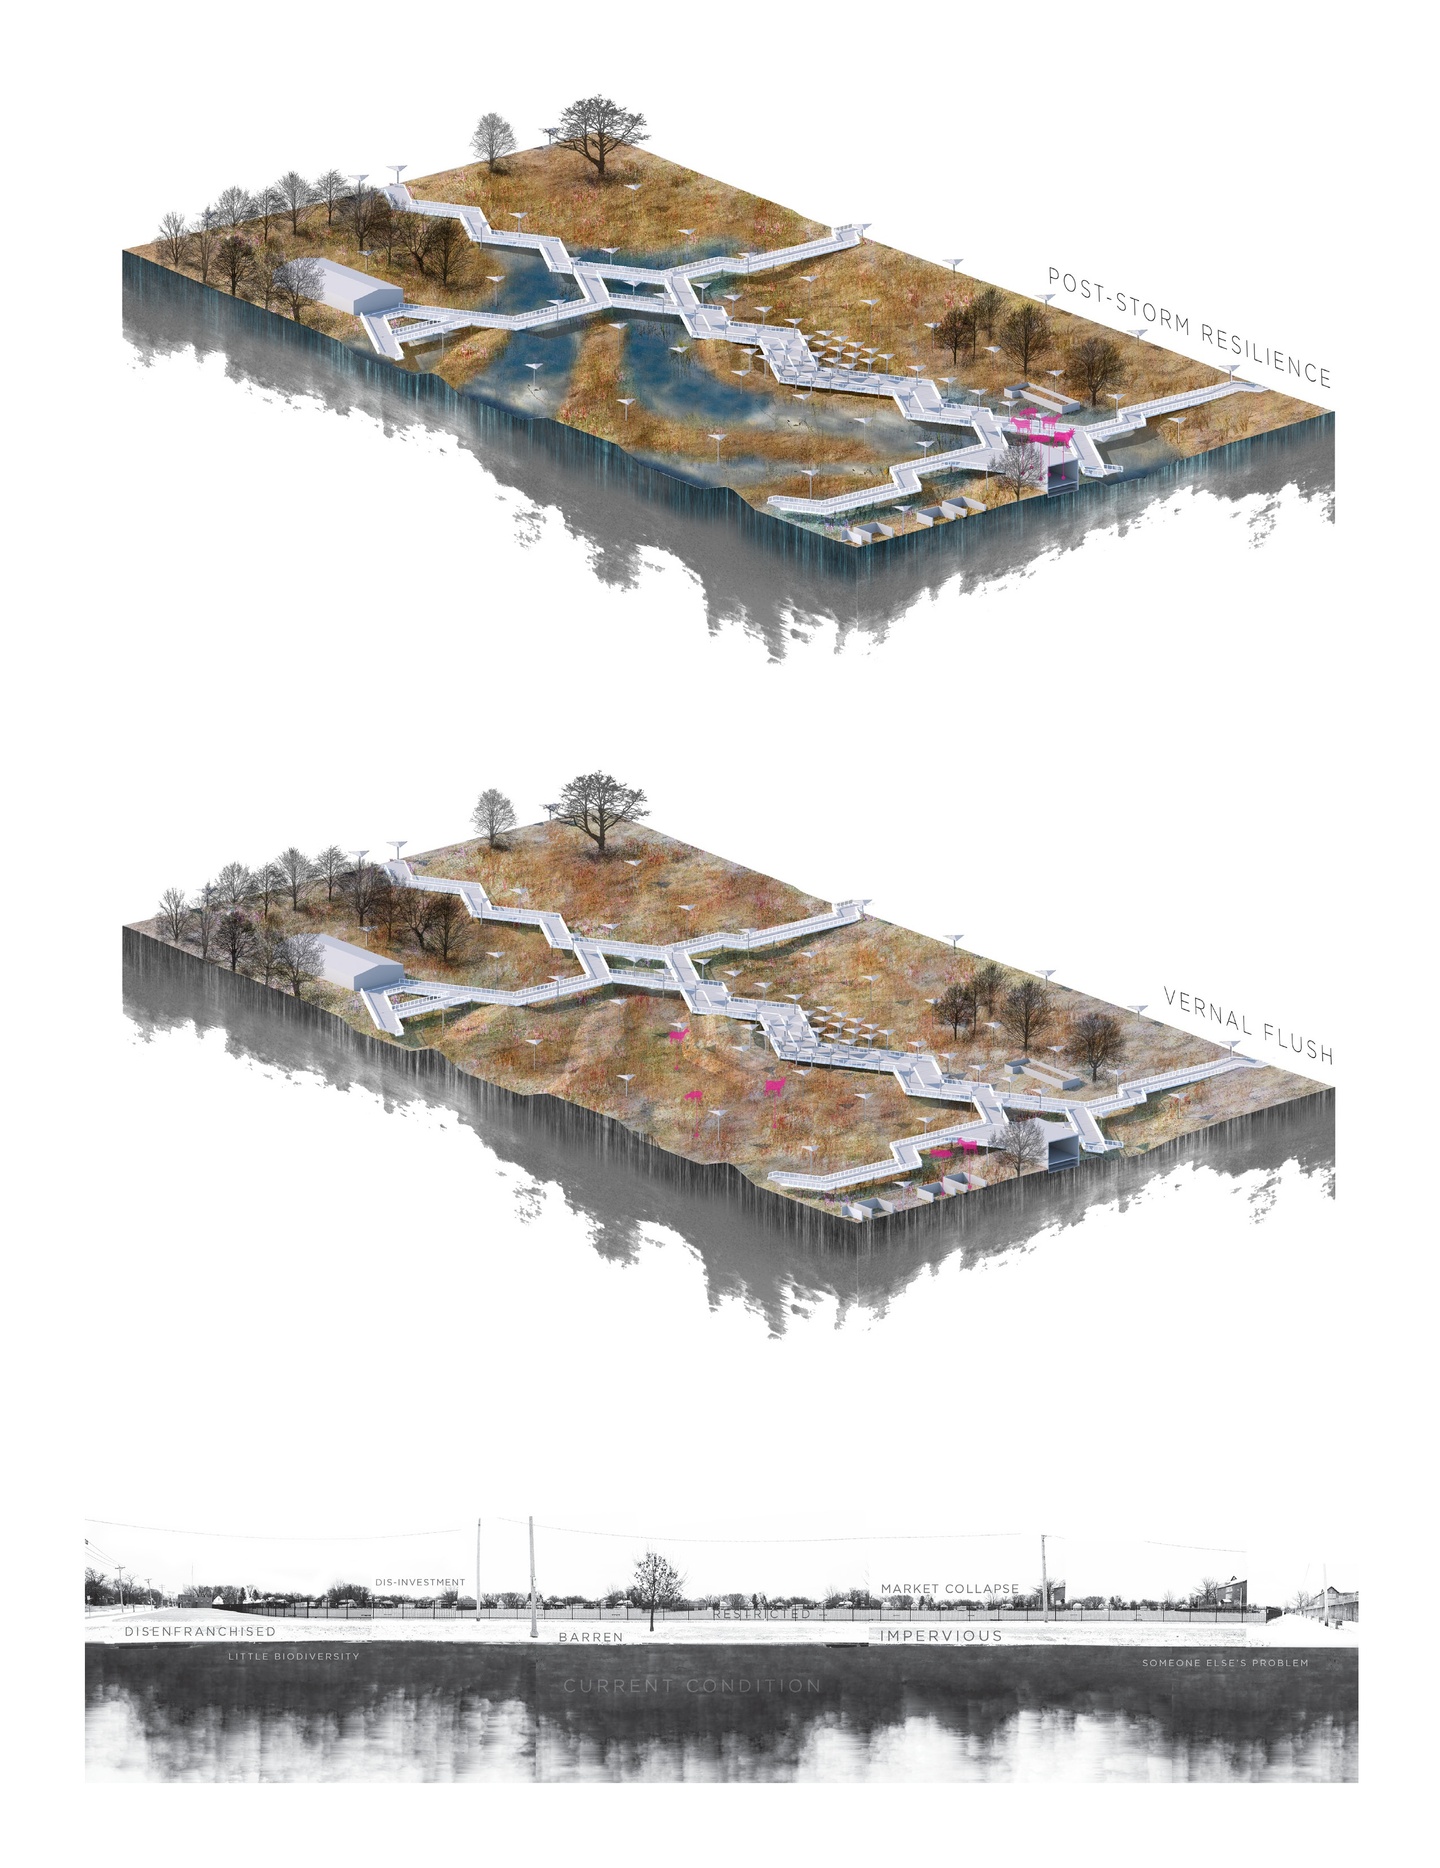 Two axonometric renderings and an elevation of an outdoor site with a boardwalk. The first rendering is labeled "Post-Storm Resilience" and shows flooding, the second rendering is labeled "Vernal Flush" and shows deer in the landscape. 